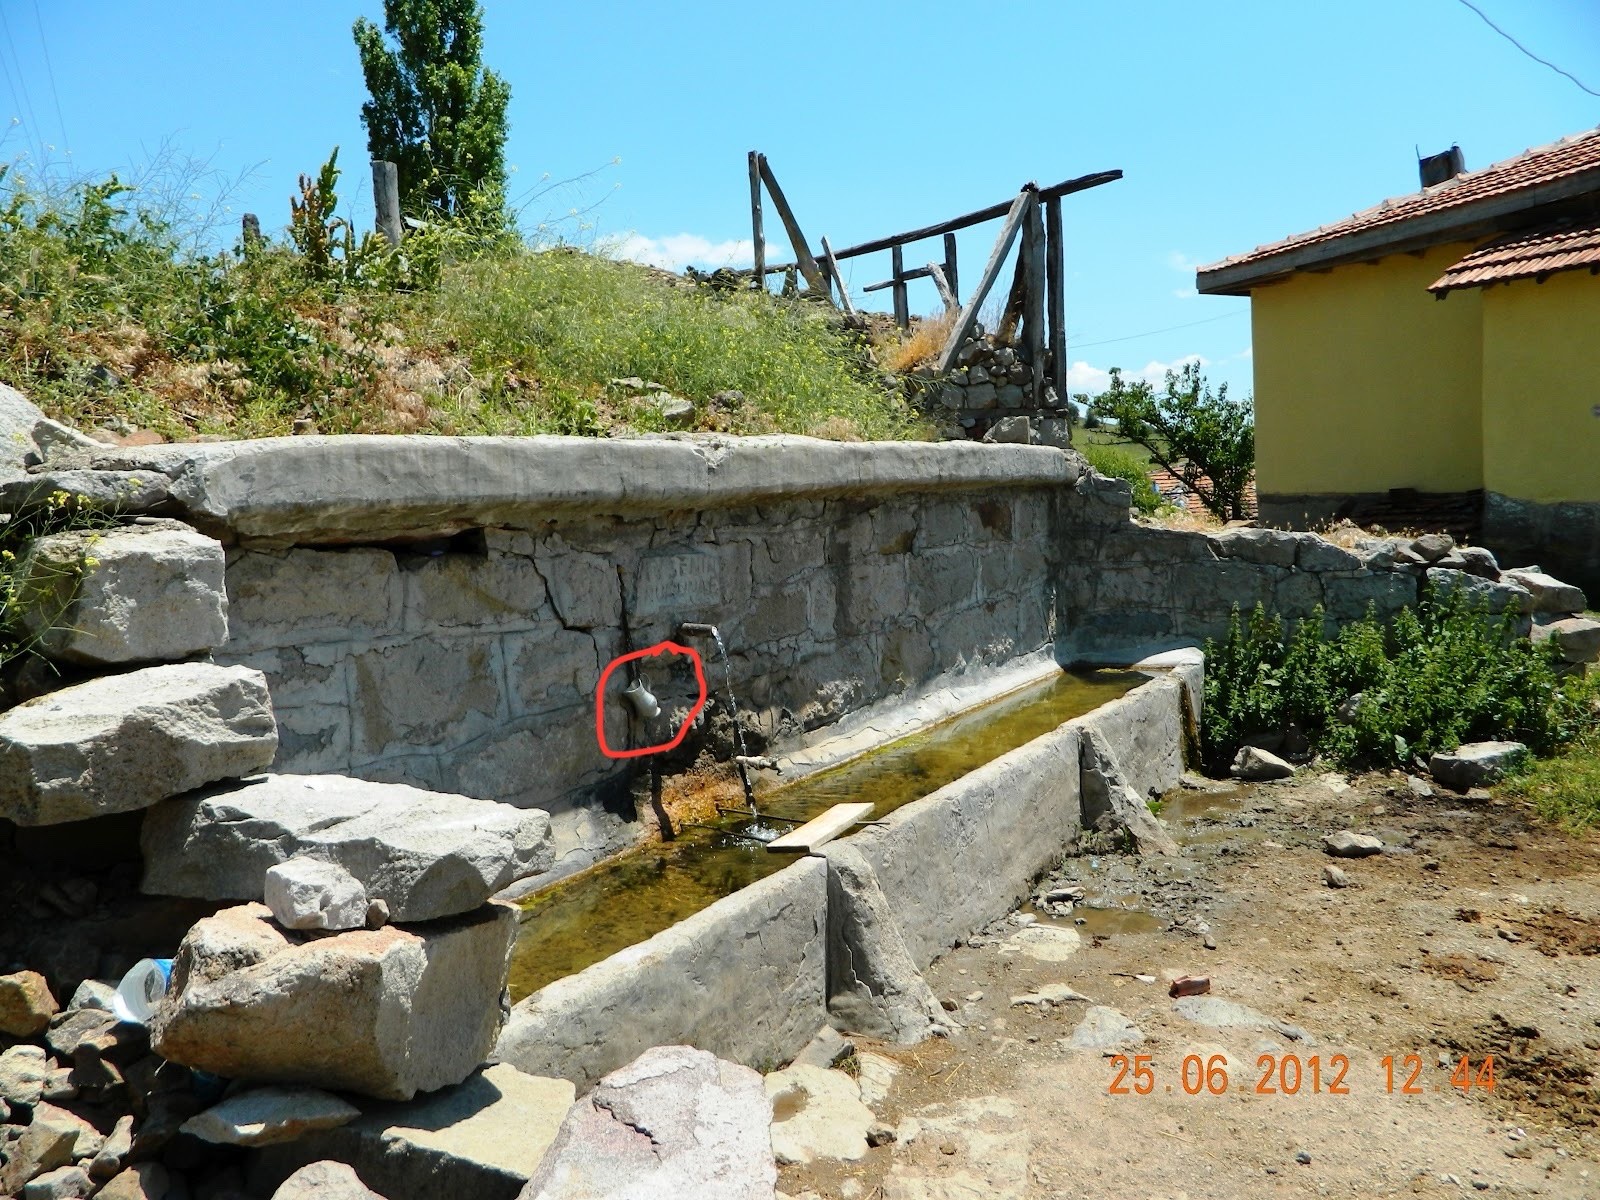 Photo of a "çeşme" (fountain) in Central Anatolia as described in the post.